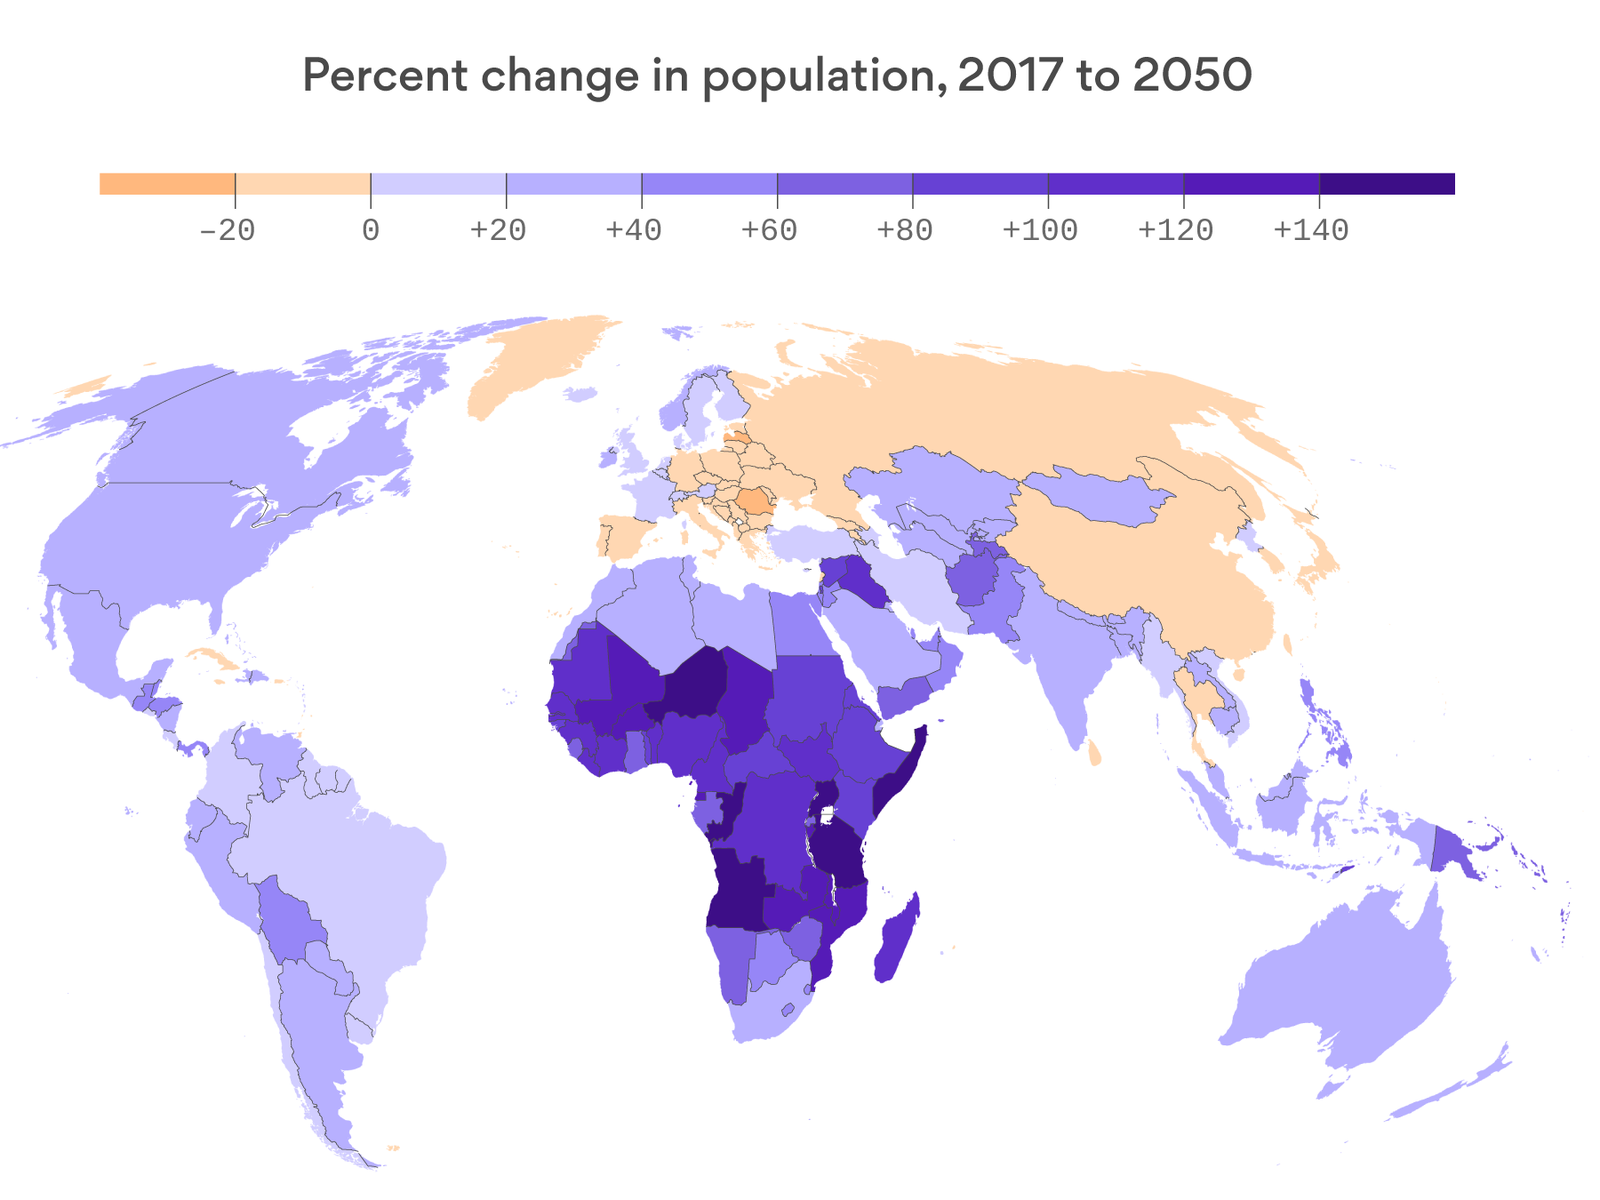 Which country's population will shrink?